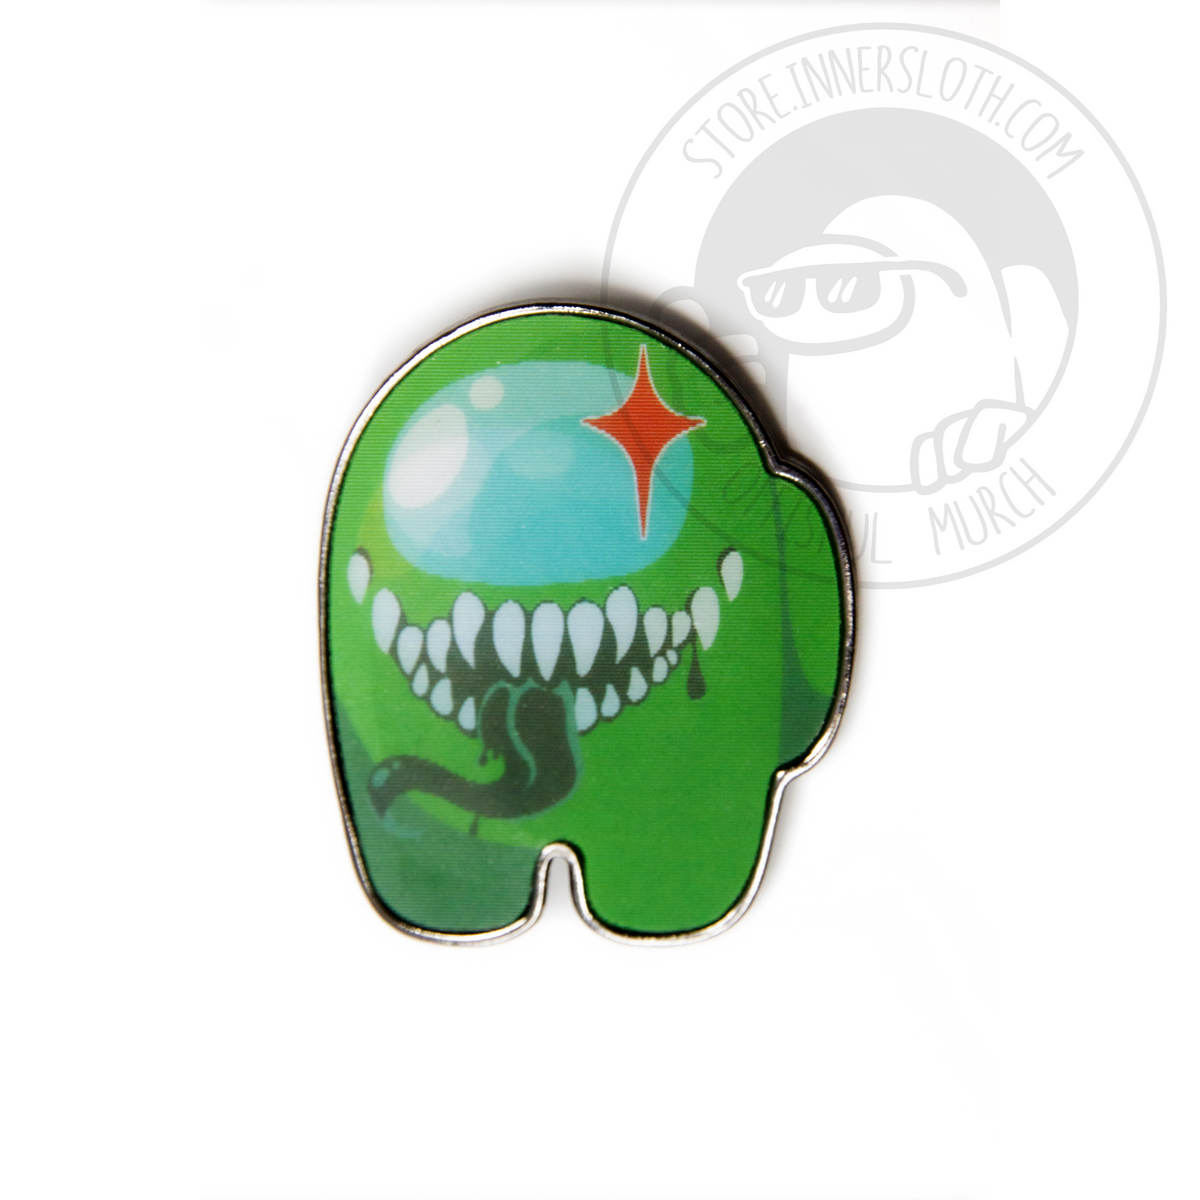 A still image of the Among Us: Lenticular Impostor Pin in Green, showing the Impostor.